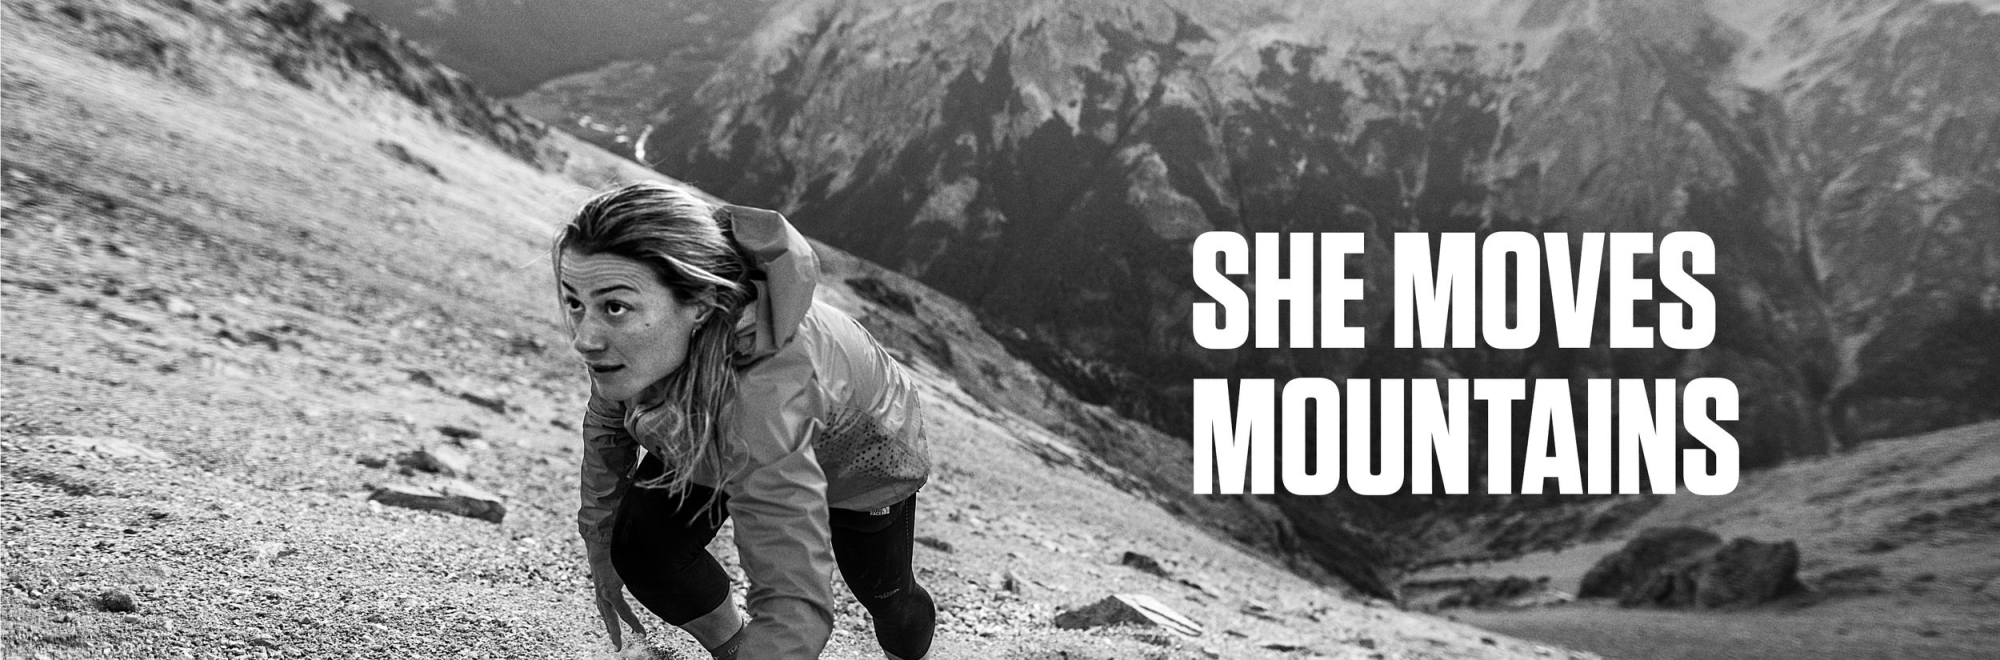 Where Gillette got it wrong, The North Face gets it right with its ‘She Moves Mountains’ campaign